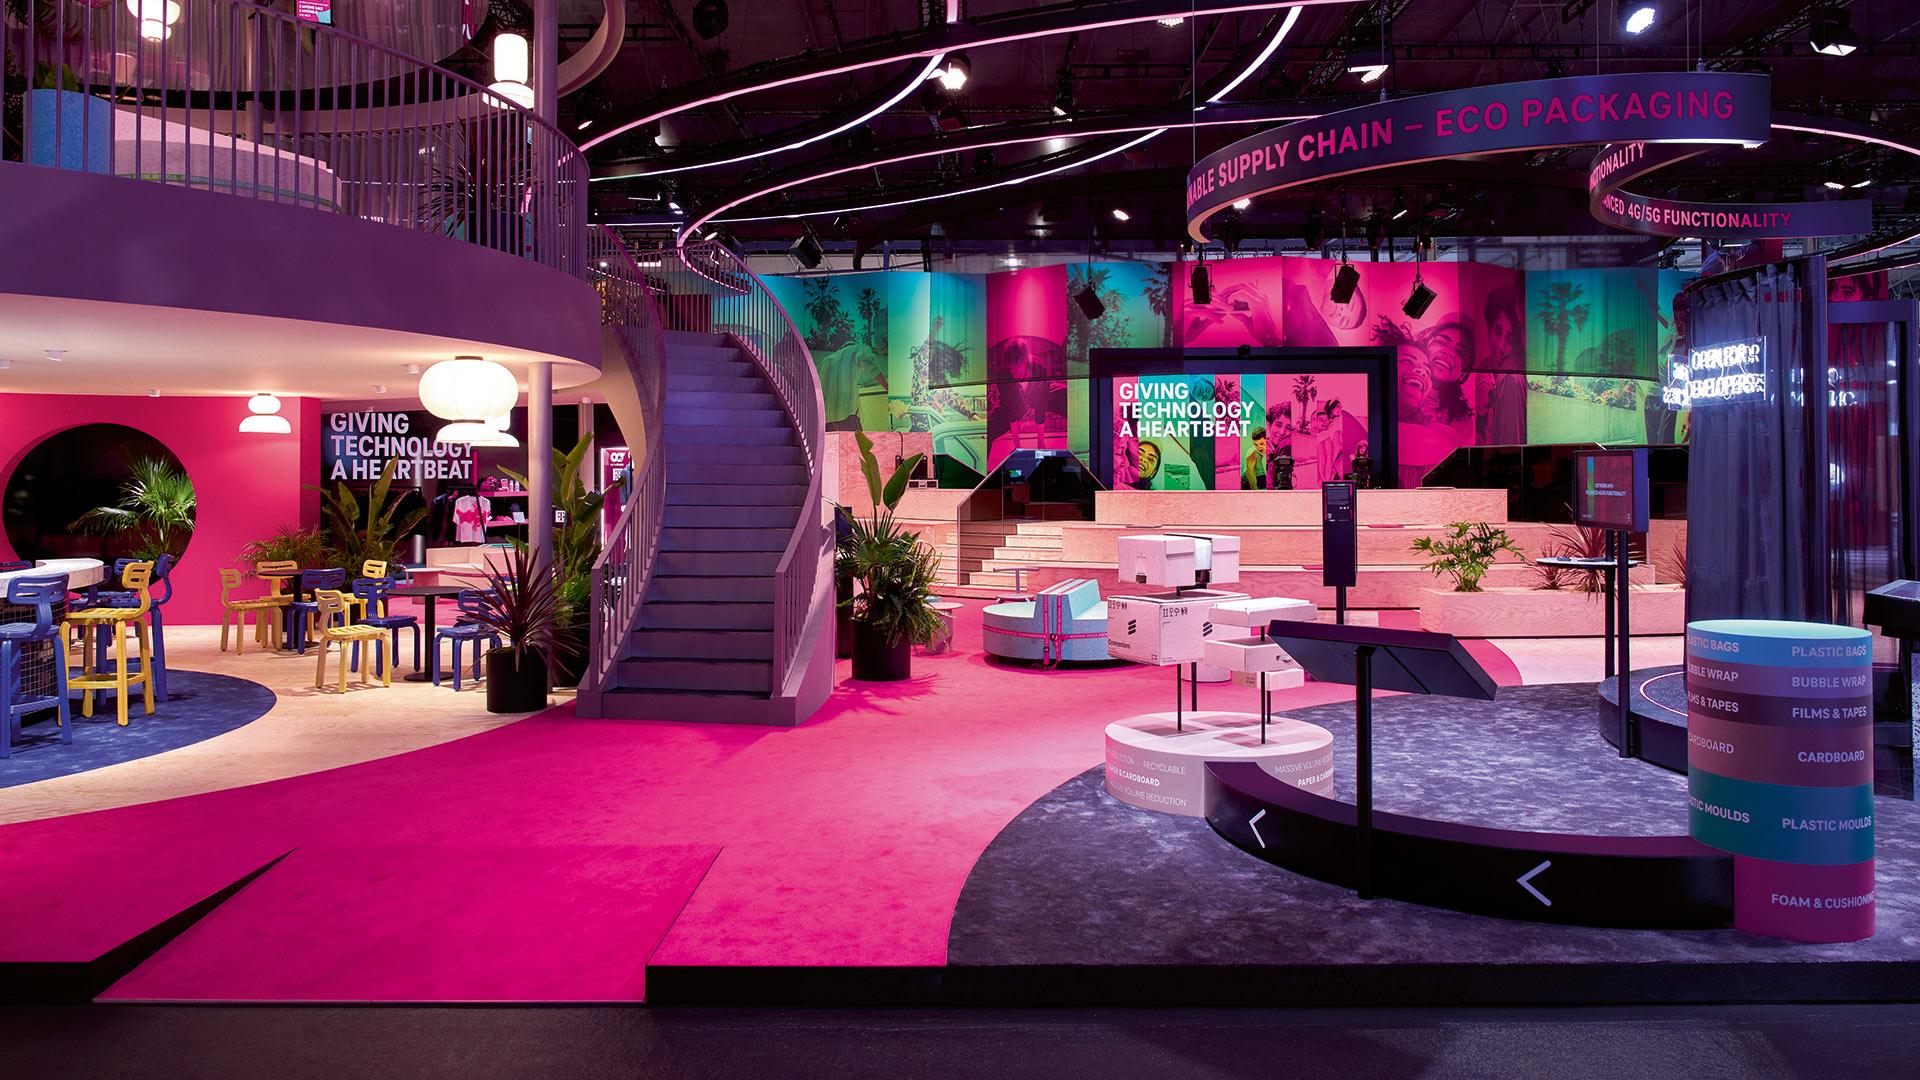 MWC 2023, Deutsche Telekom. Side antrance showing the hospitality area on left side and on the right side topic of Sustainable Packaging, ensuring the move towards a sustainable supply chain.